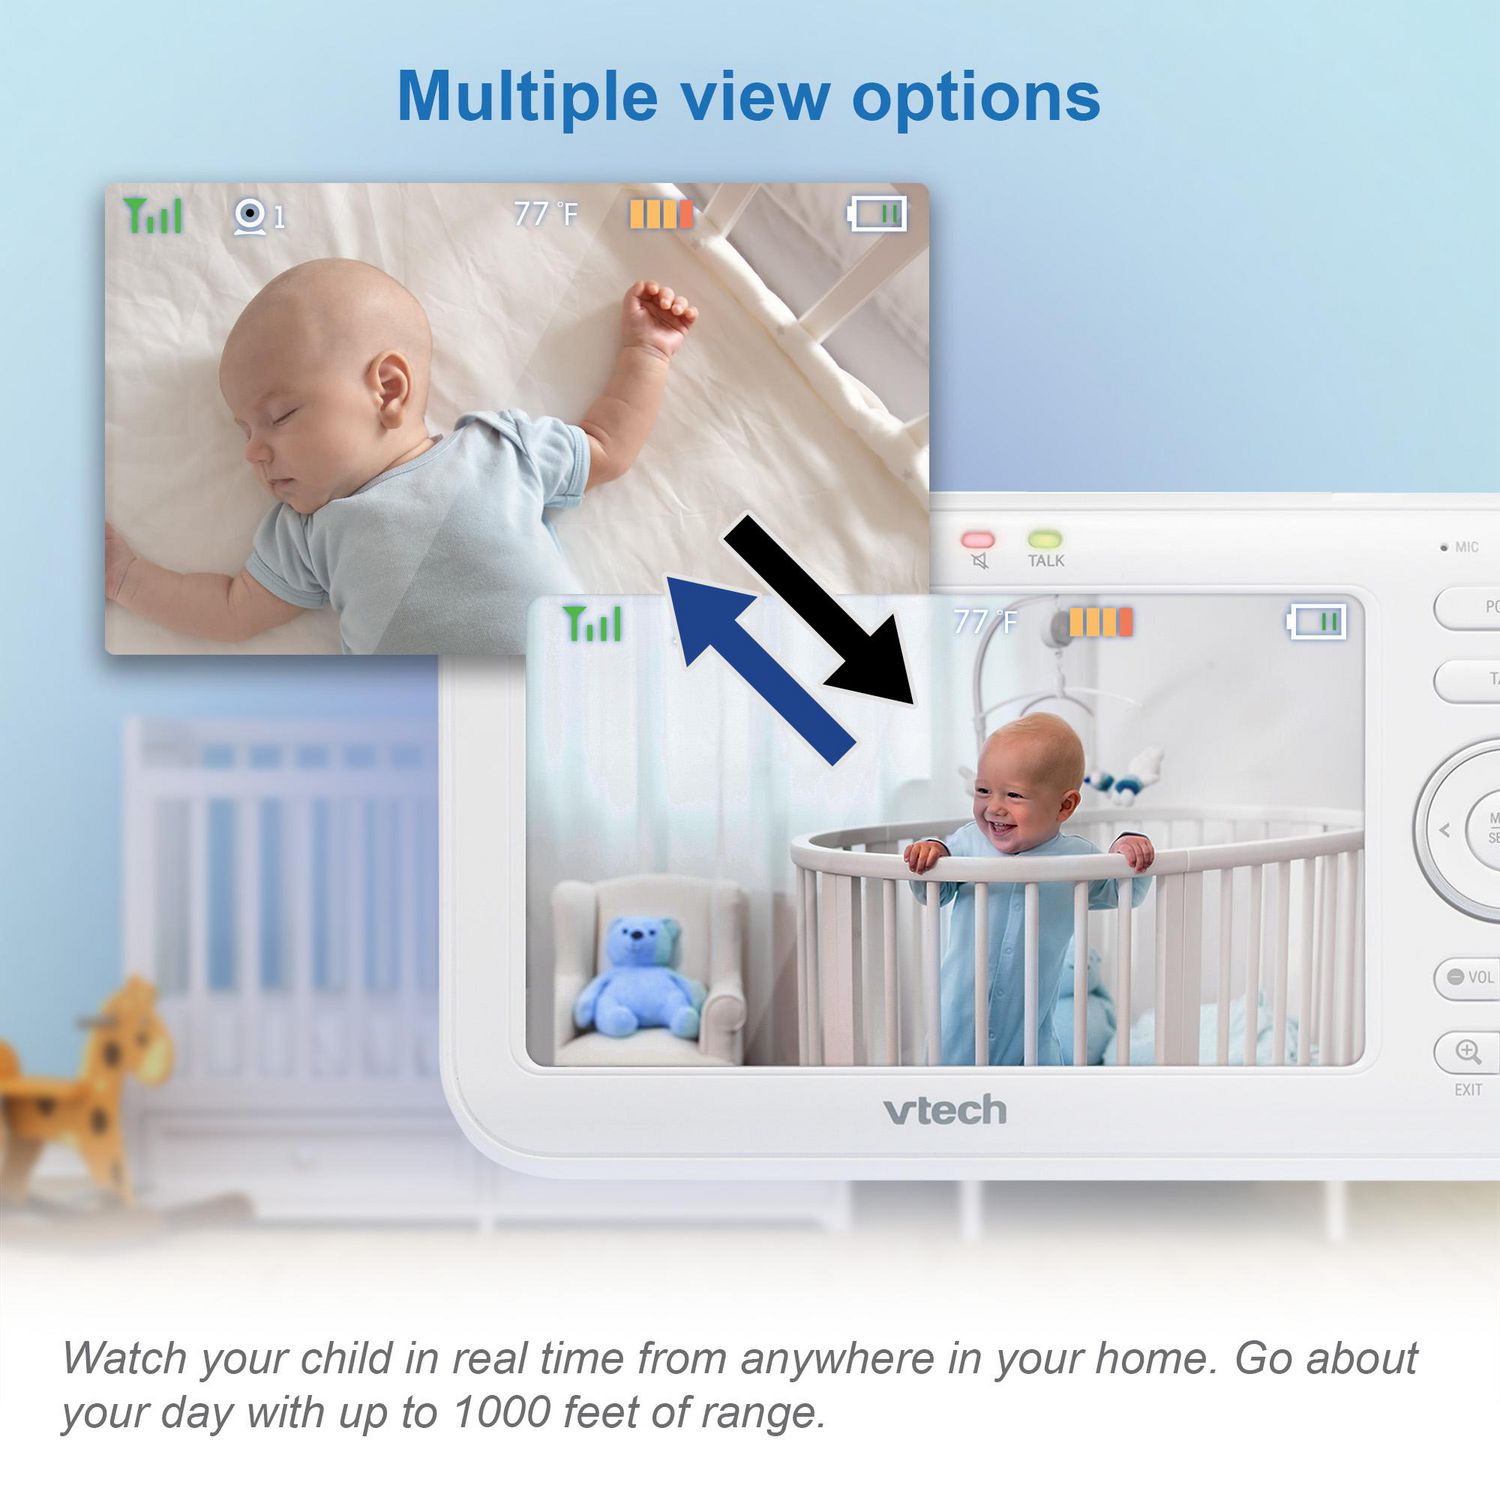 VTech 2 Camera 5 Digital Video Baby Monitor with Pan Scan and Night Light,  VM5255-2, White 